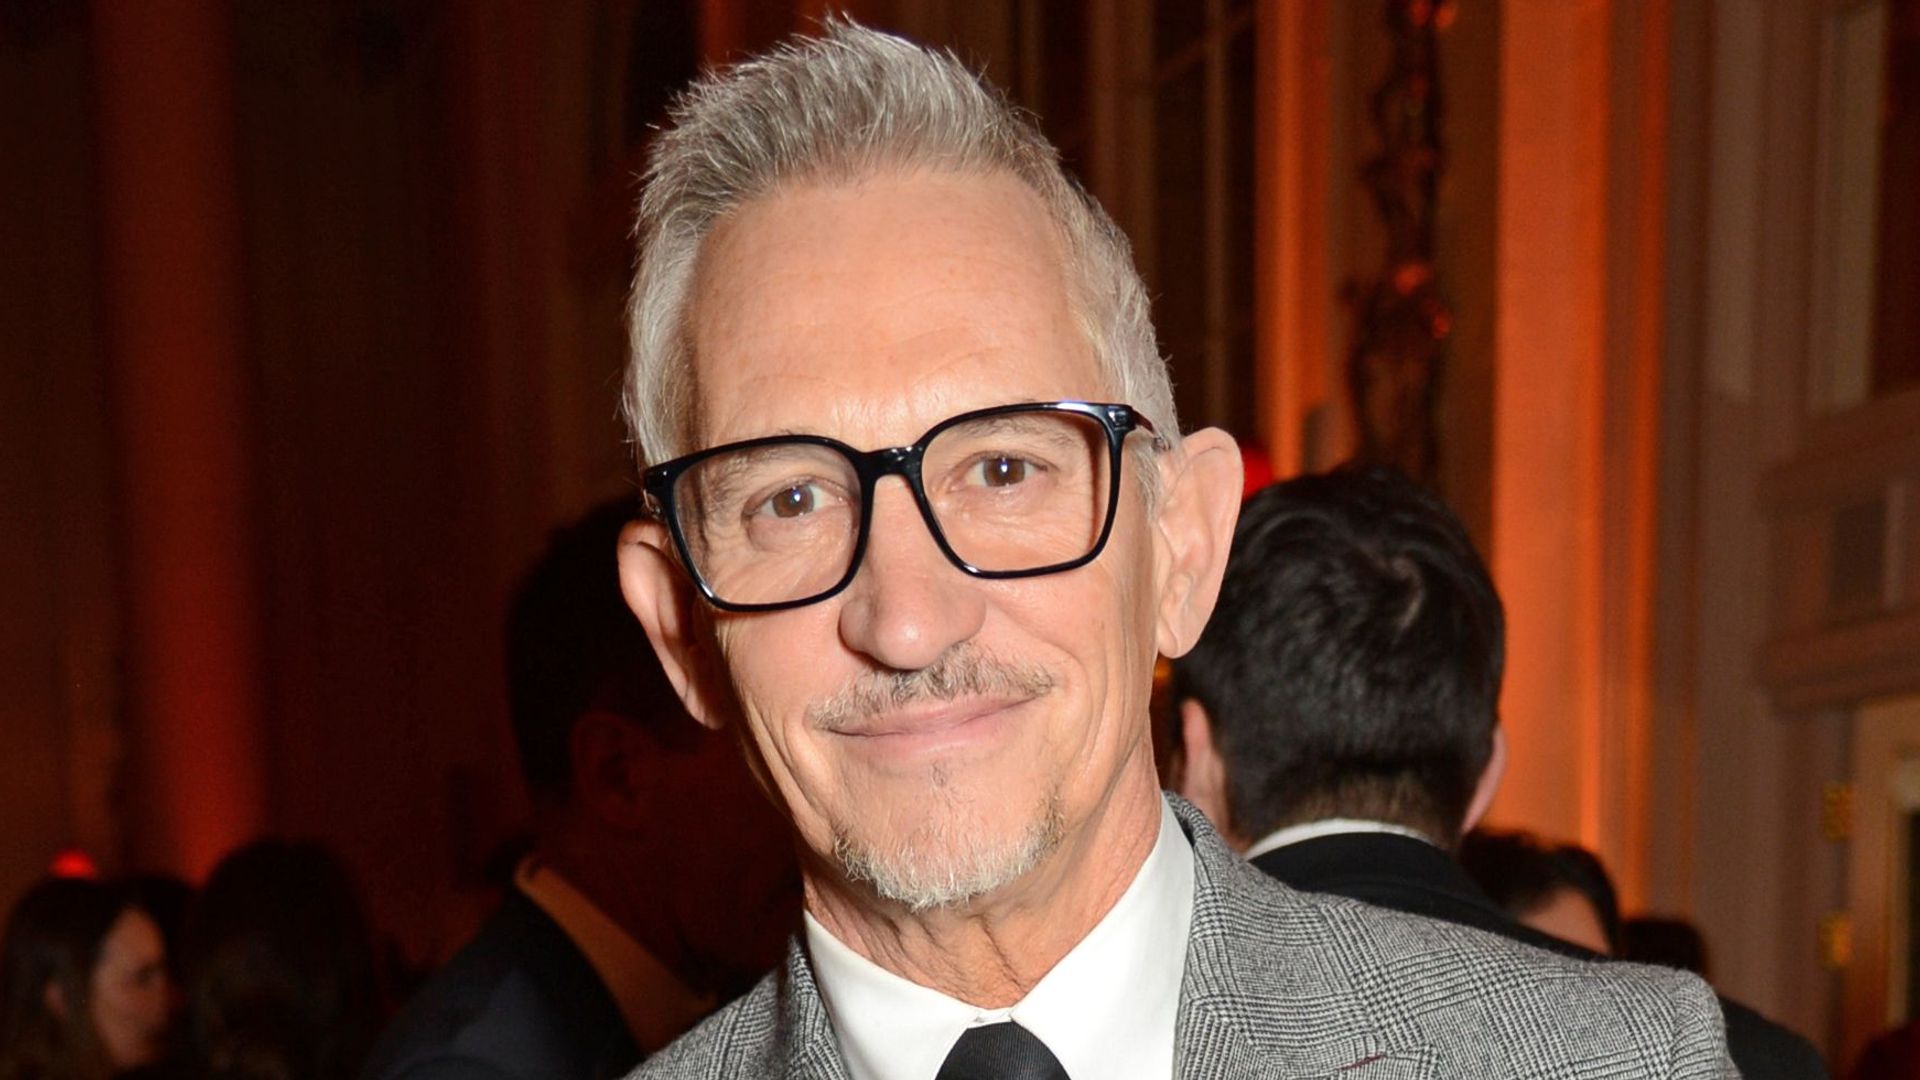 Gary Lineker attends GQ Men of the Year in Association with Boss, London, UK